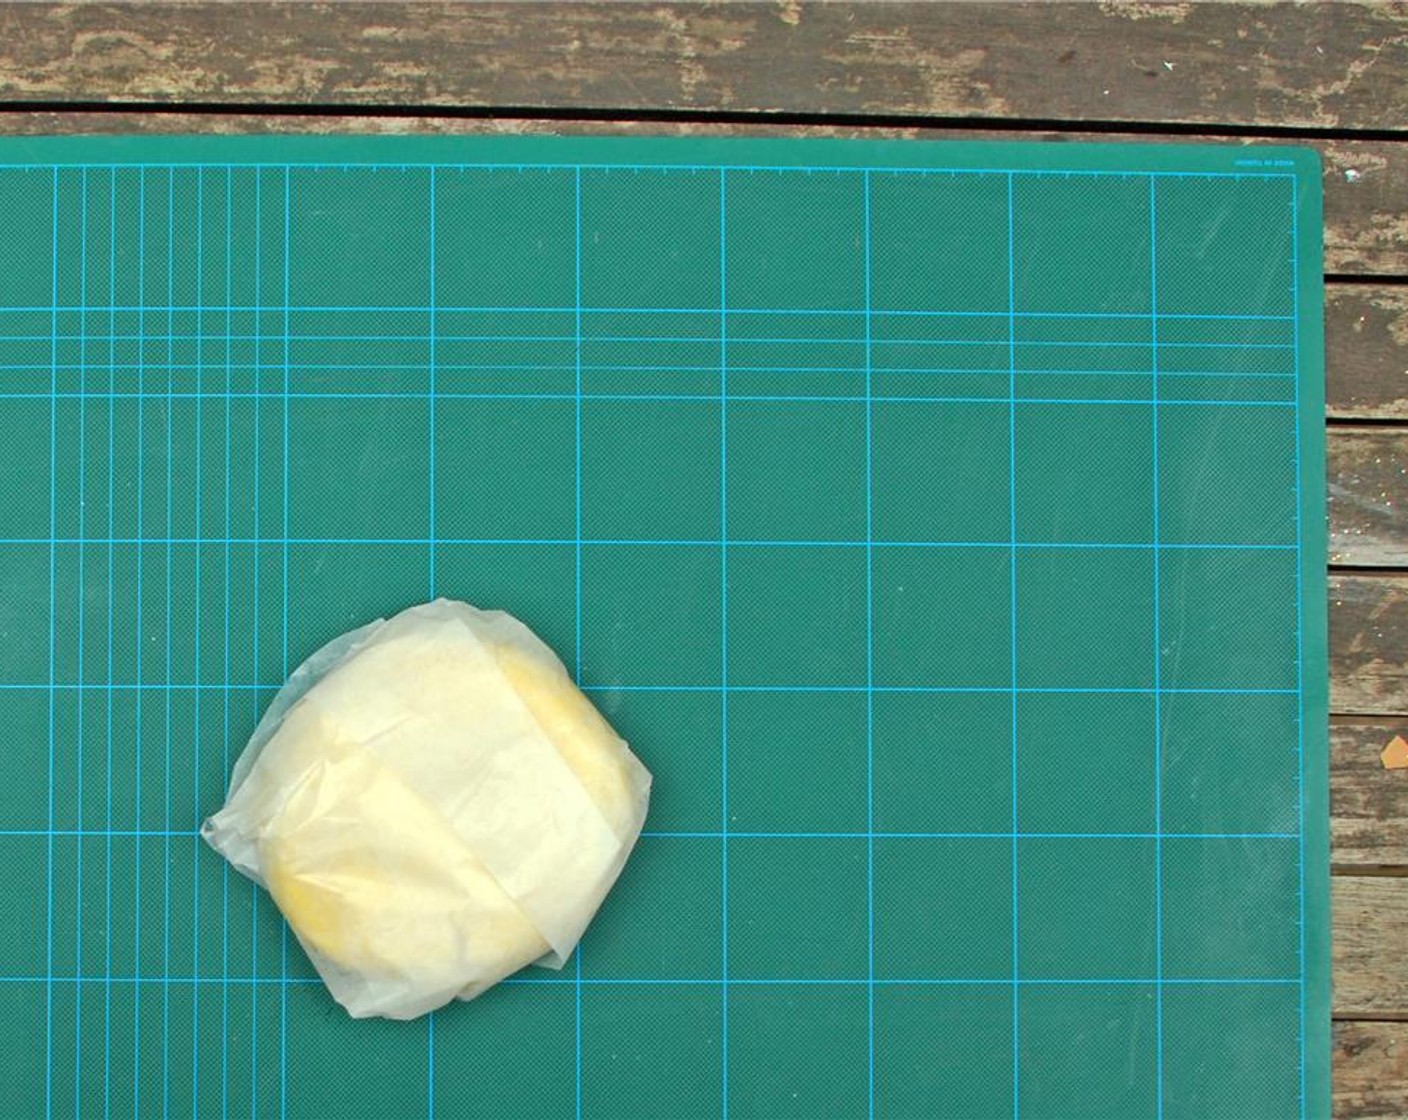 step 4 Form the dough into a ball, wrap it in baking paper and place the dough in the fridge to rest for 30 minutes. Preheat the oven to 320 degrees F (160 degrees C).